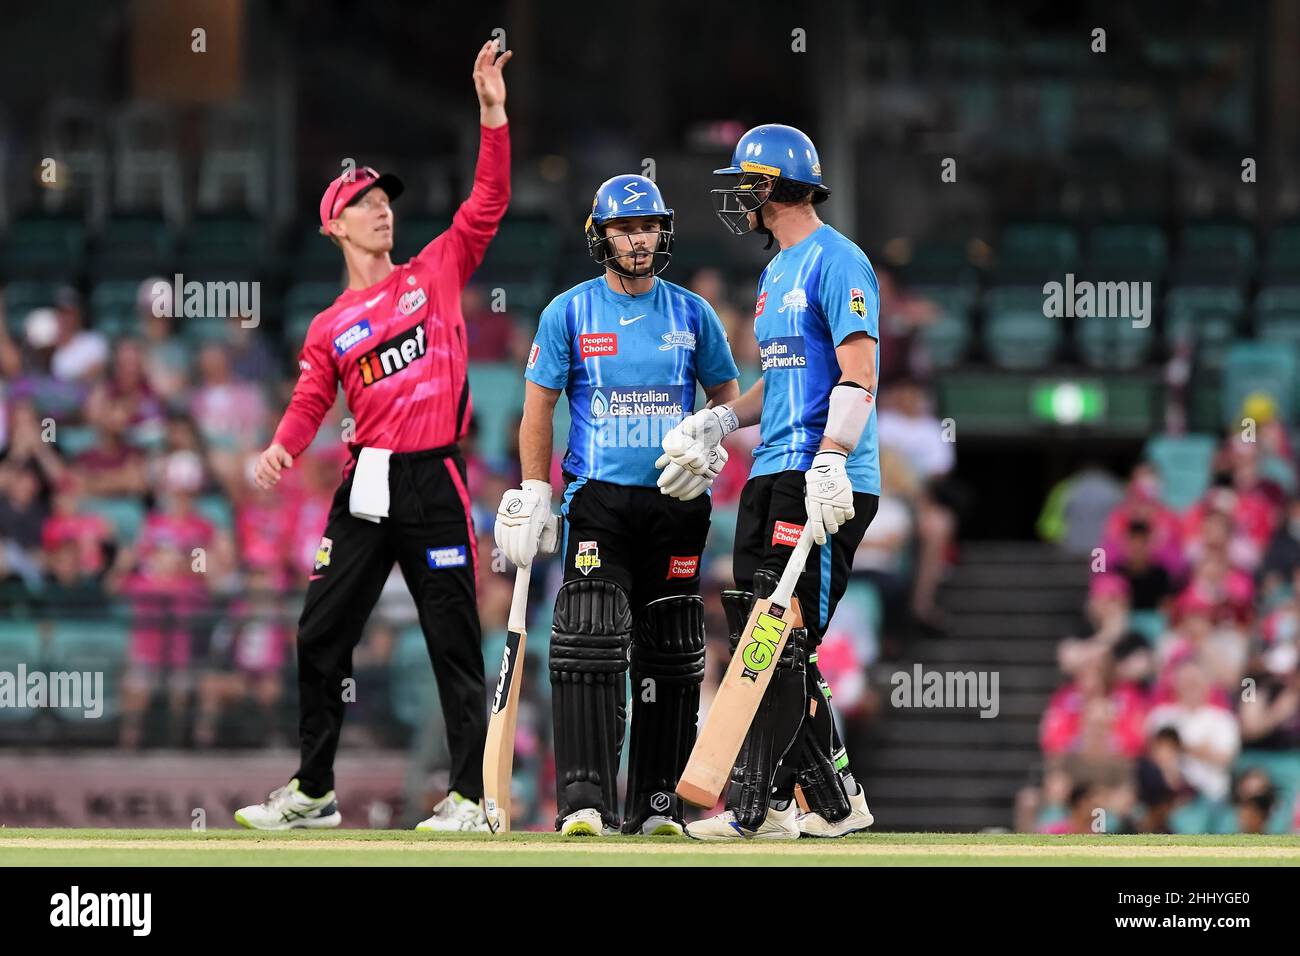 Sydney, Australia, 26 January, 2022. Thomas Kelly of the Strikers and Jon Wells of the Strikers talk between overs during the Big Bash League Challenger cricket match between Sydney Sixers and Adelaide Strikers at The Sydney Cricket Ground on January 26, 2022 in Sydney, Australia. Credit: Steven Markham/Speed Media/Alamy Live News Stock Photo